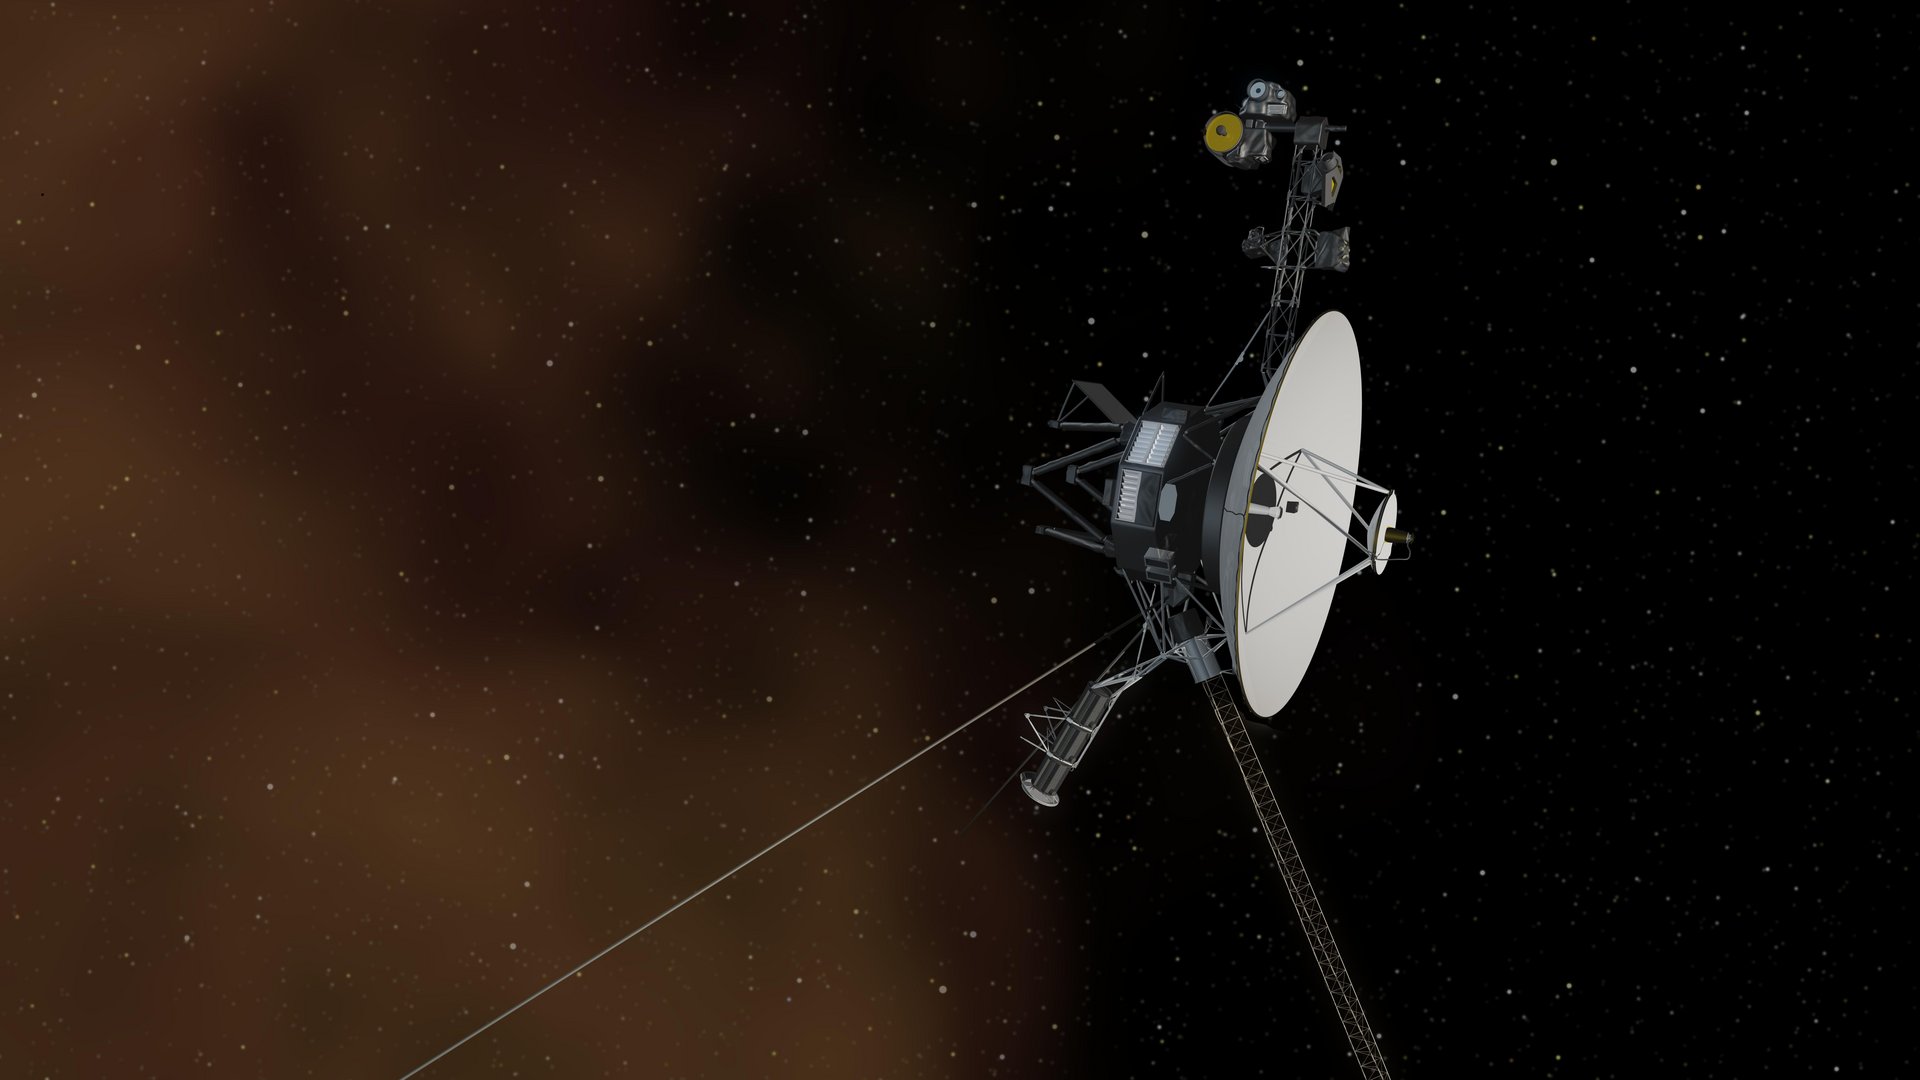 Illustration of the Voyager 1 space probe.